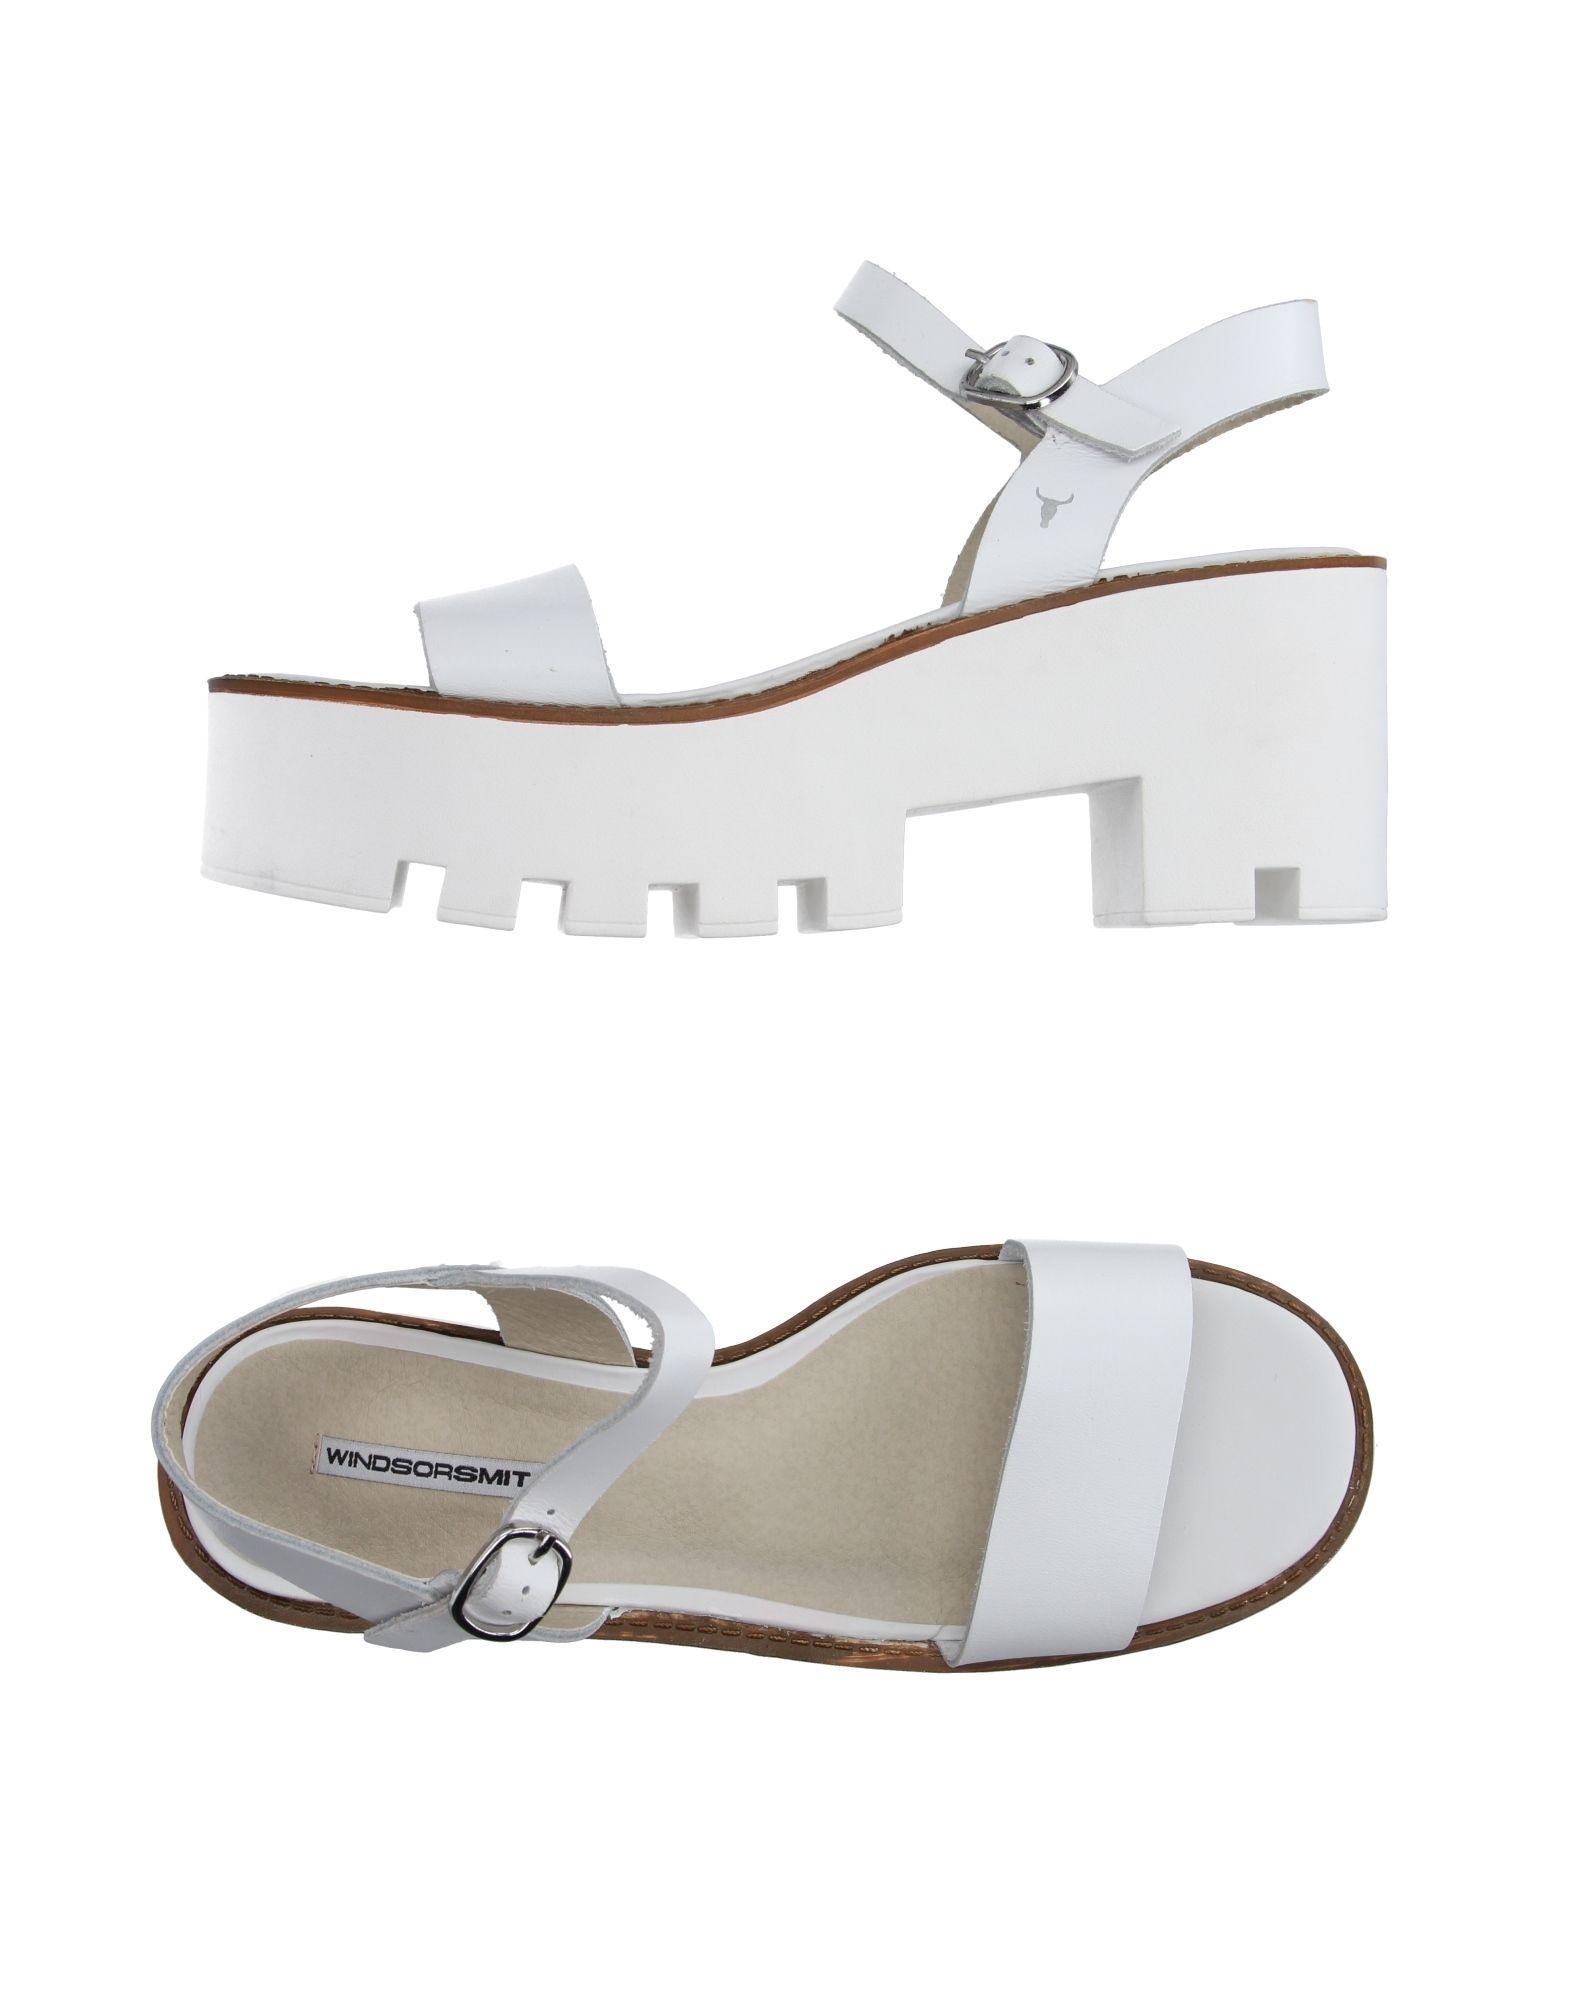 Lyst - Windsor Smith Sandals in White